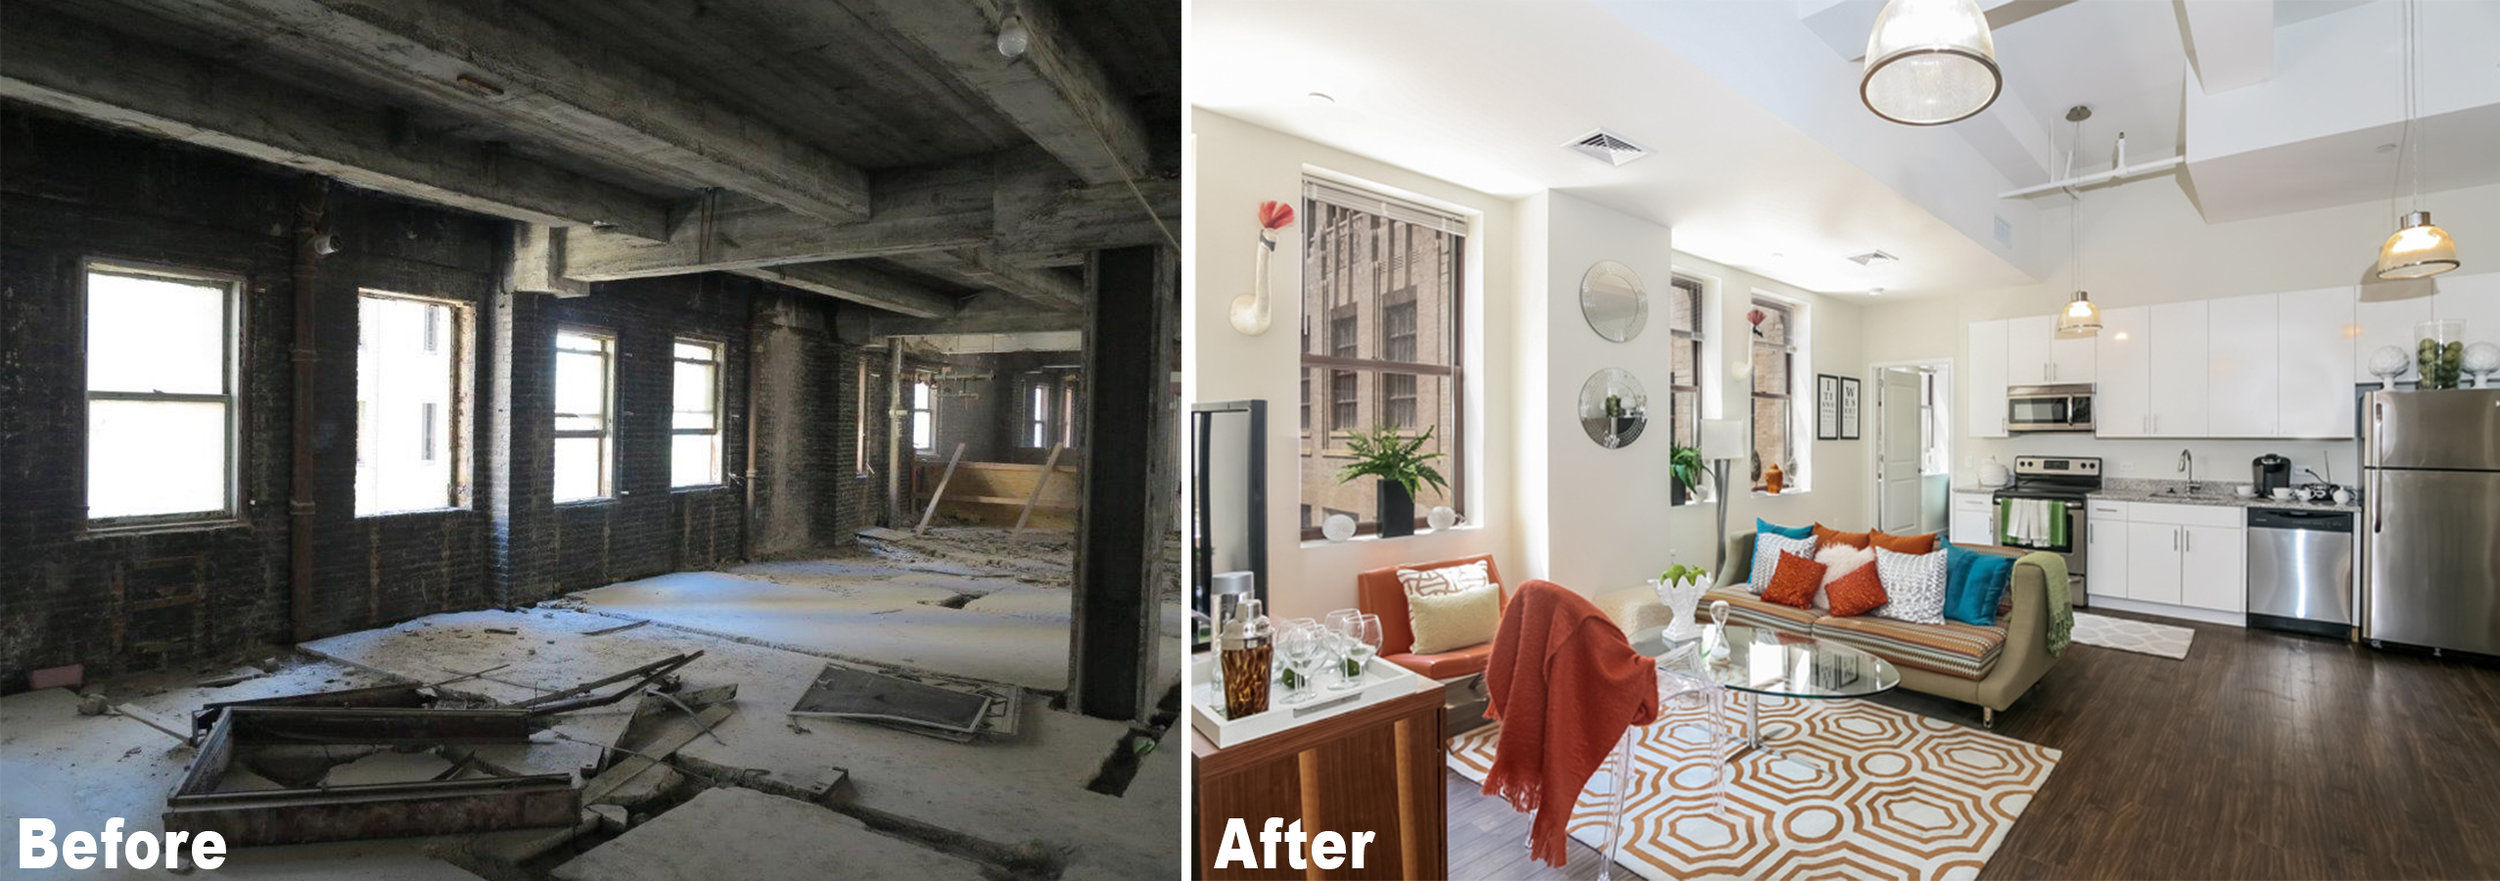 Apartment Before and After.jpg